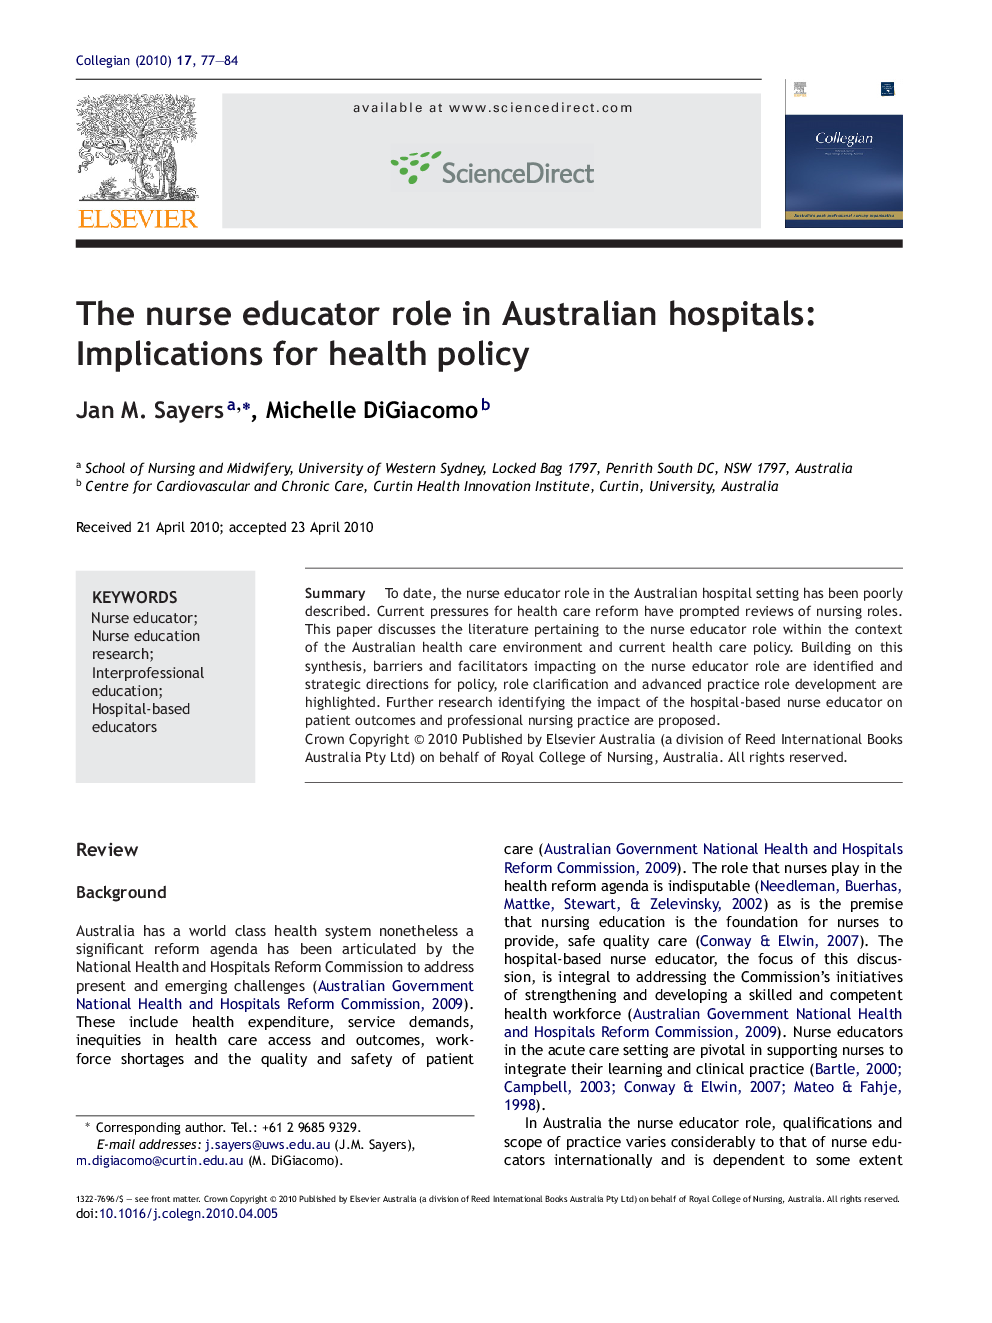 The nurse educator role in Australian hospitals: Implications for health policy